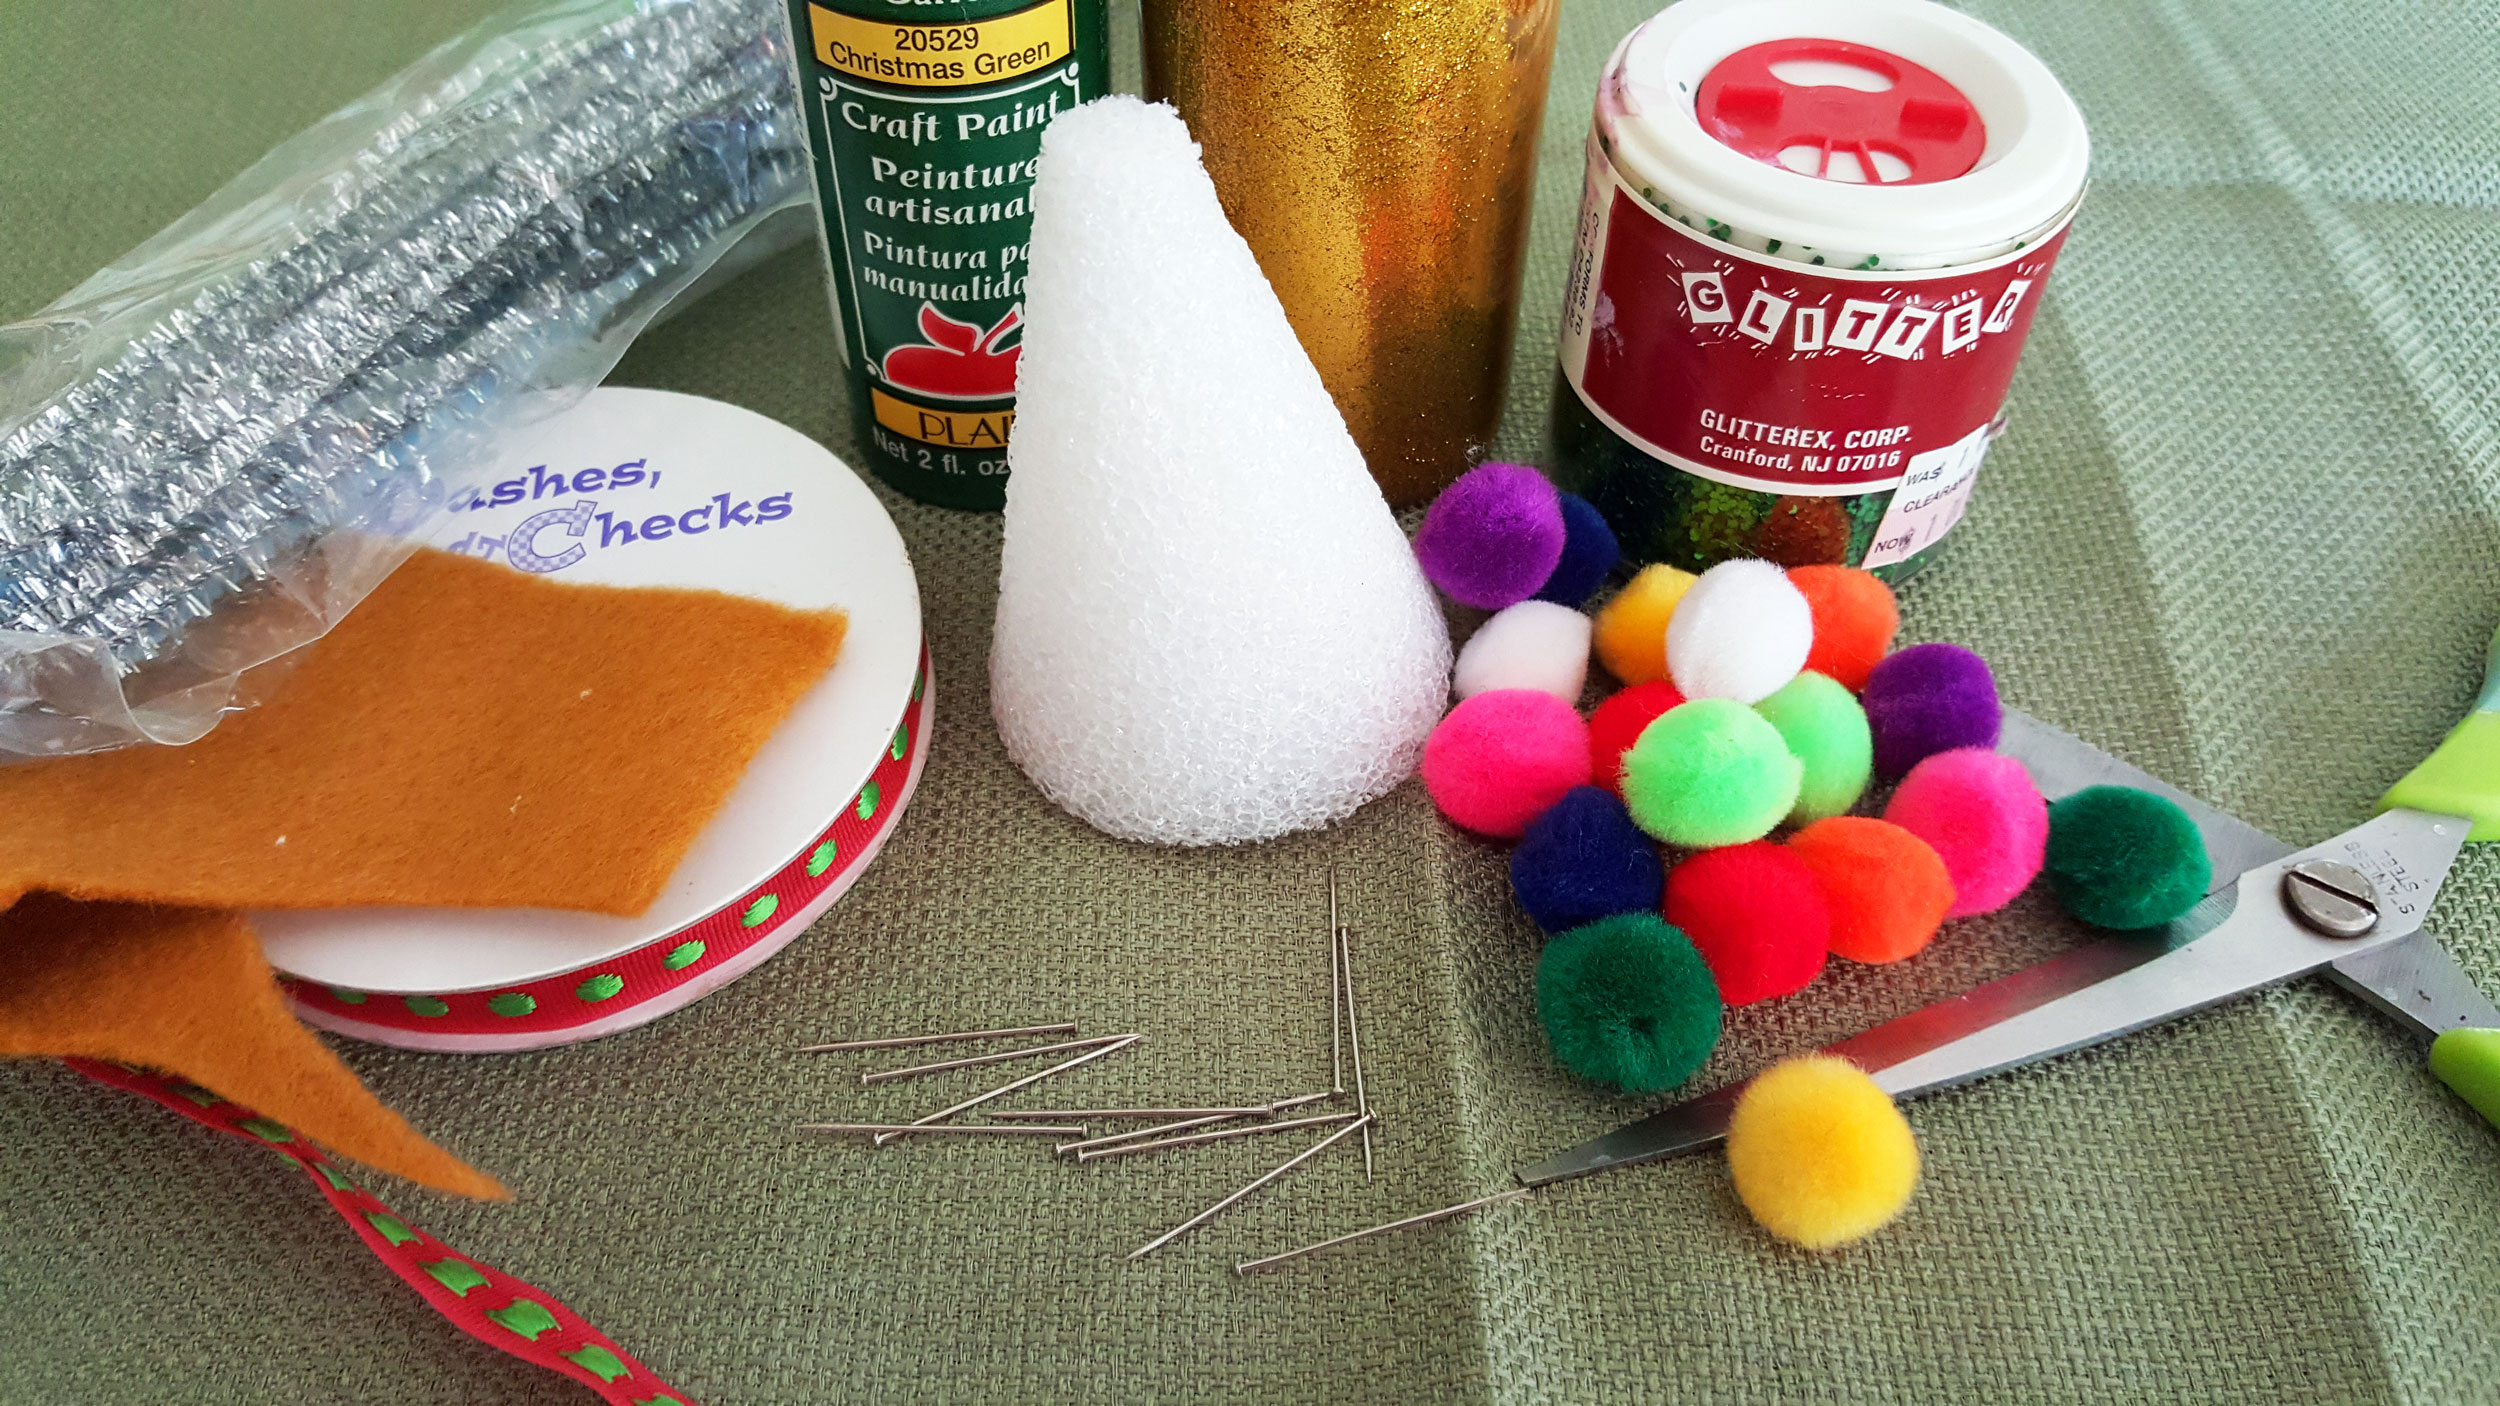 Supplies for a mini Christmas tree include a styrofoam cone, paint, glitter, pipe cleaners, glue, ribbon and pom poms. | OrnamentShop.com